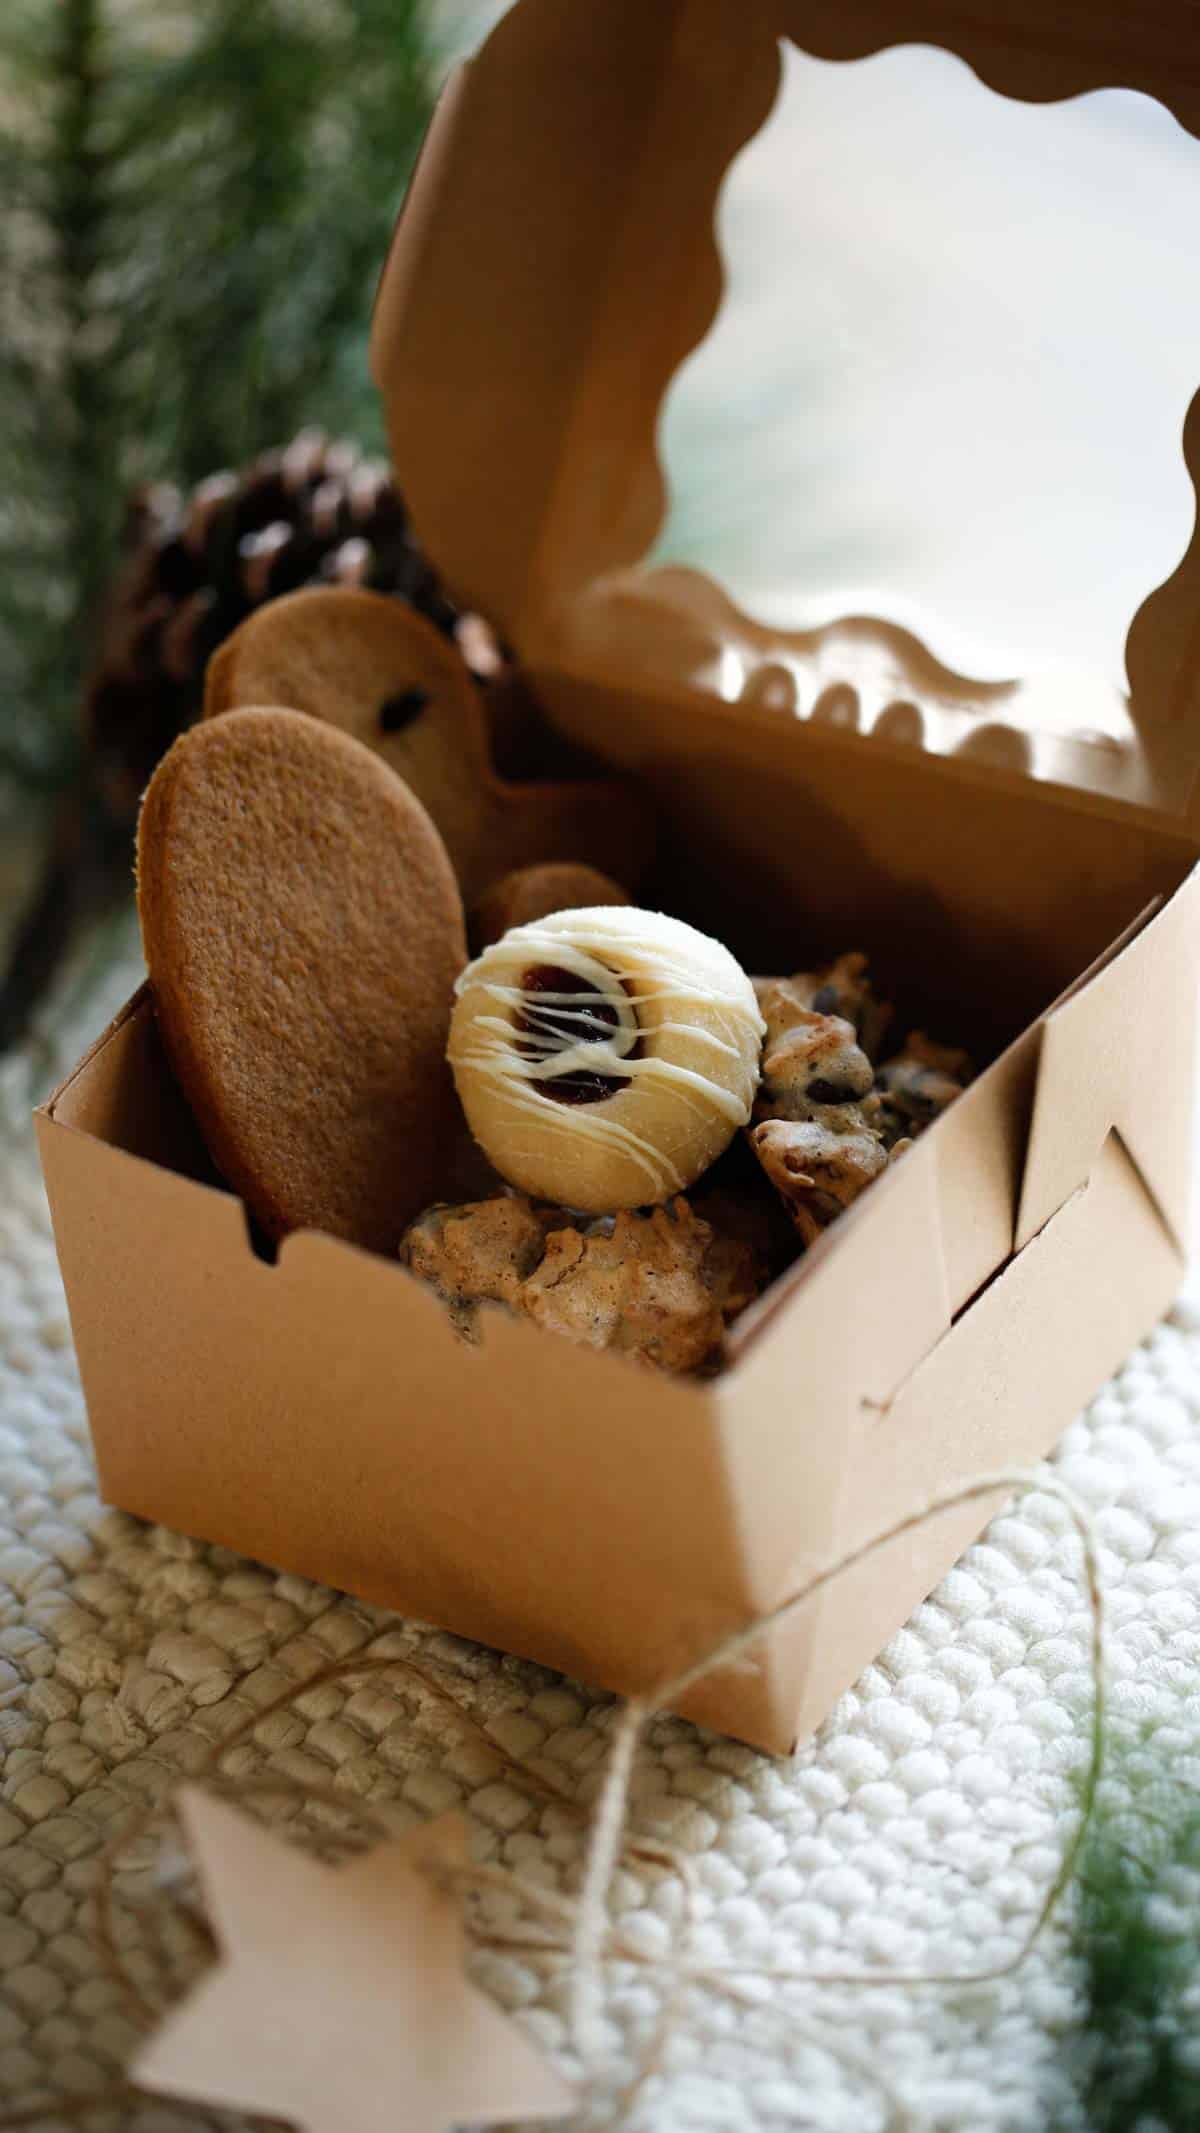 Cookies in a box packaged for gifting